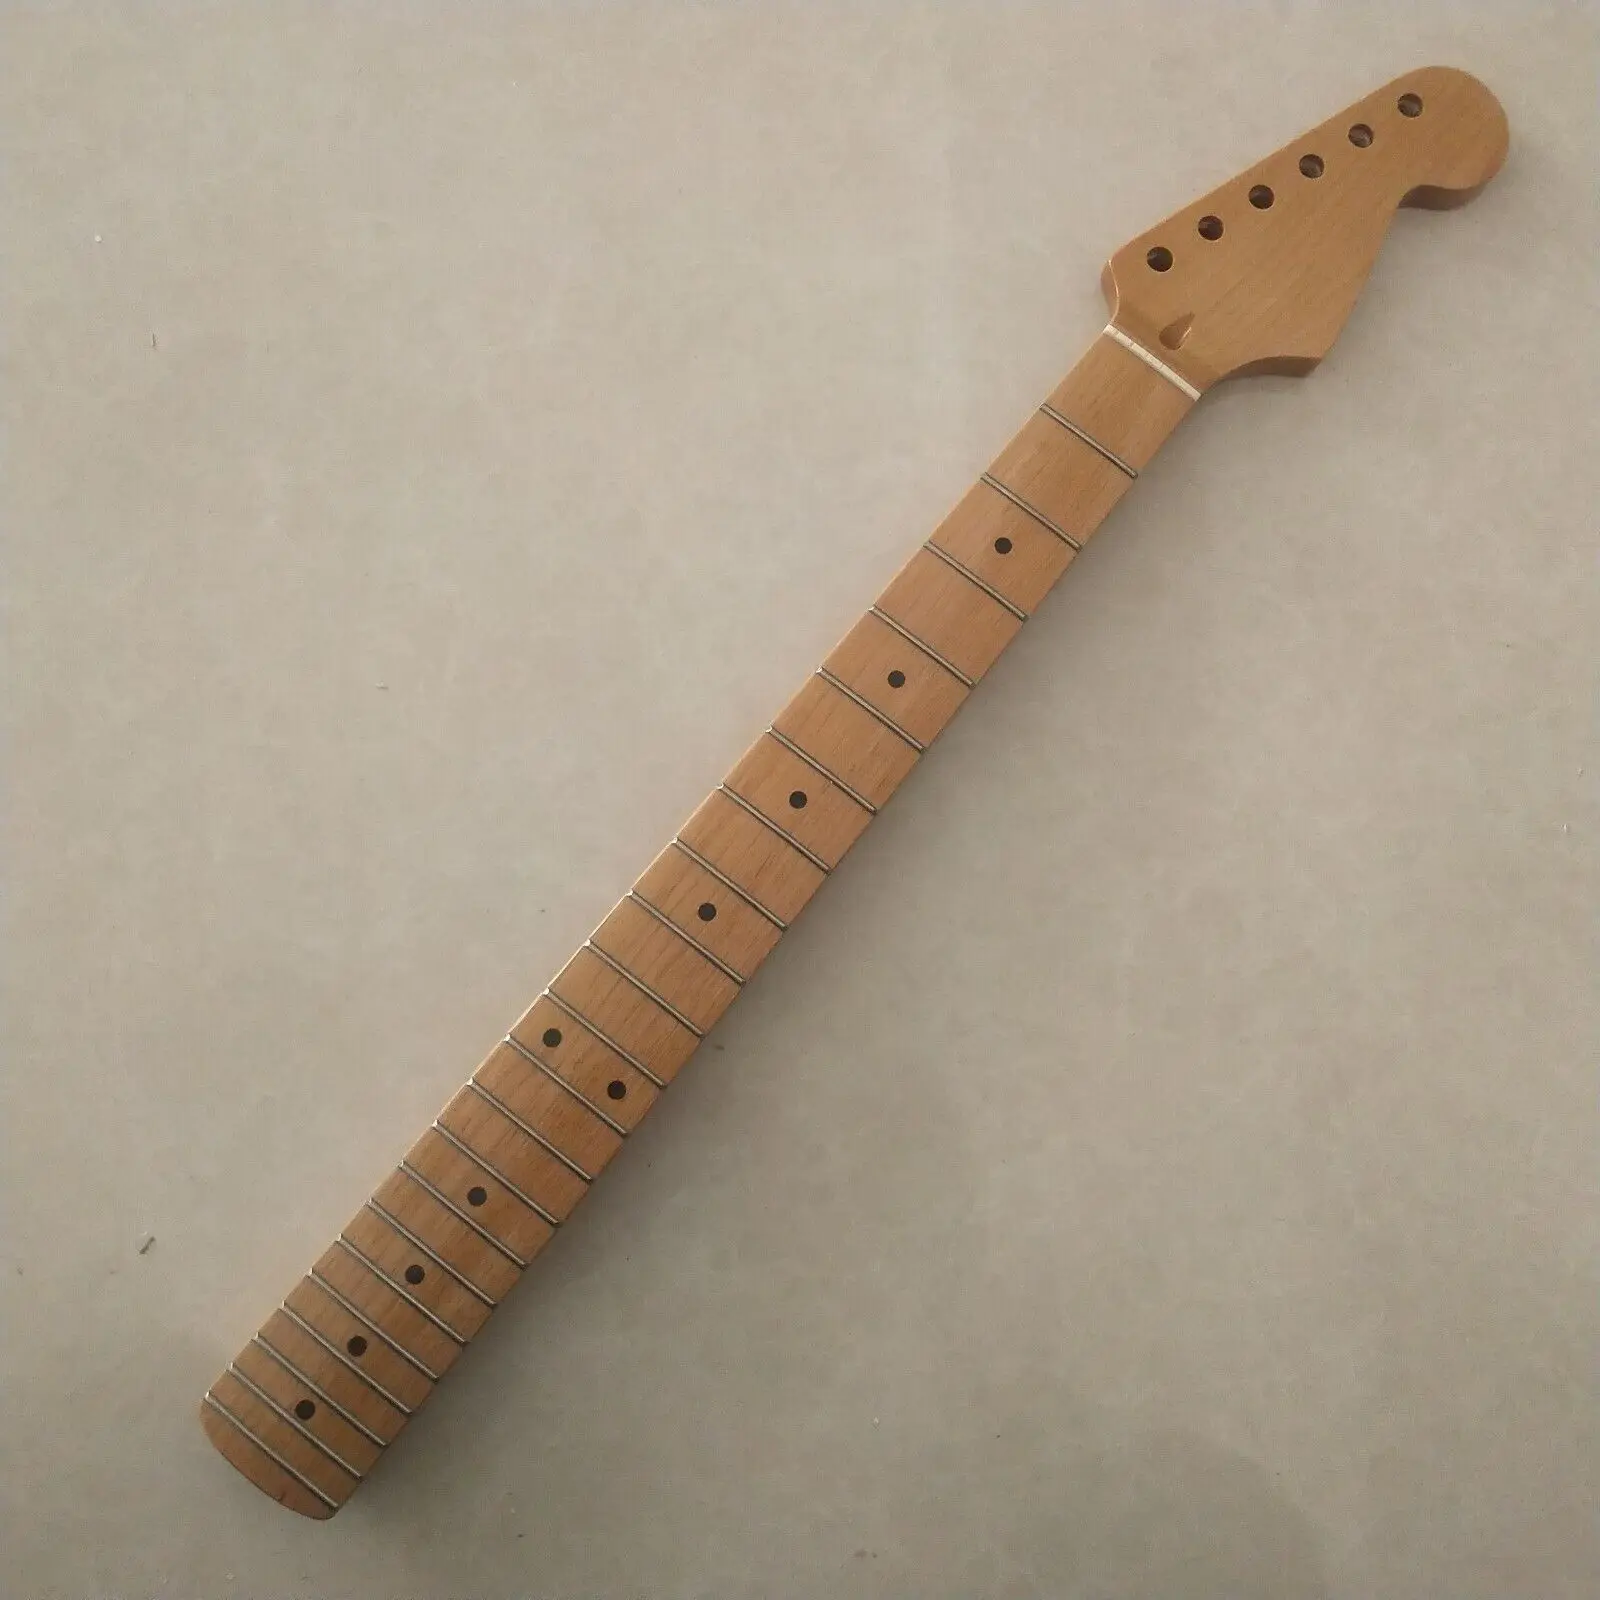 Roasted Maple Guitar Neck 22 Fret 25.5 Inch Fingerboard Dot Inlay enlarge